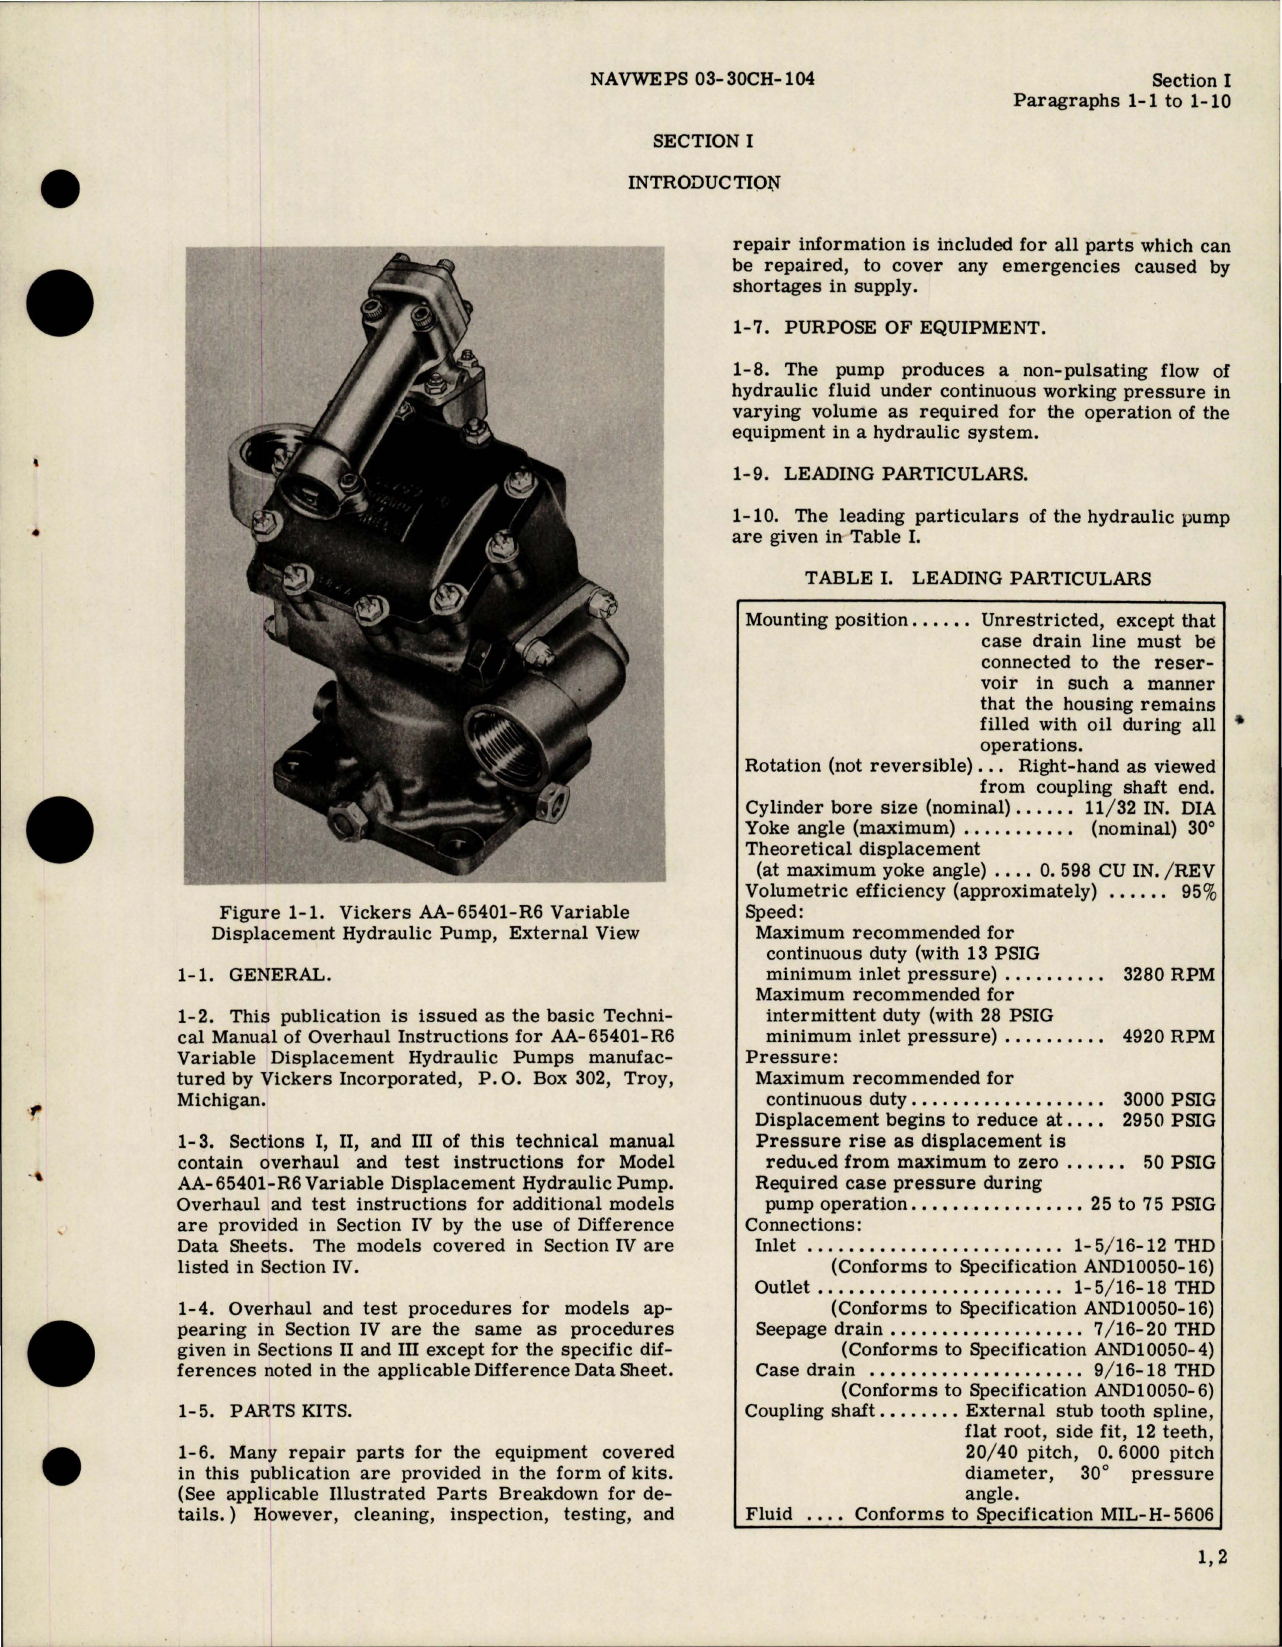 Sample page 5 from AirCorps Library document: Overhaul Instructions for Hydraulic Pump Assembly - Models AA-60401-R6 and AA-65401-R6 